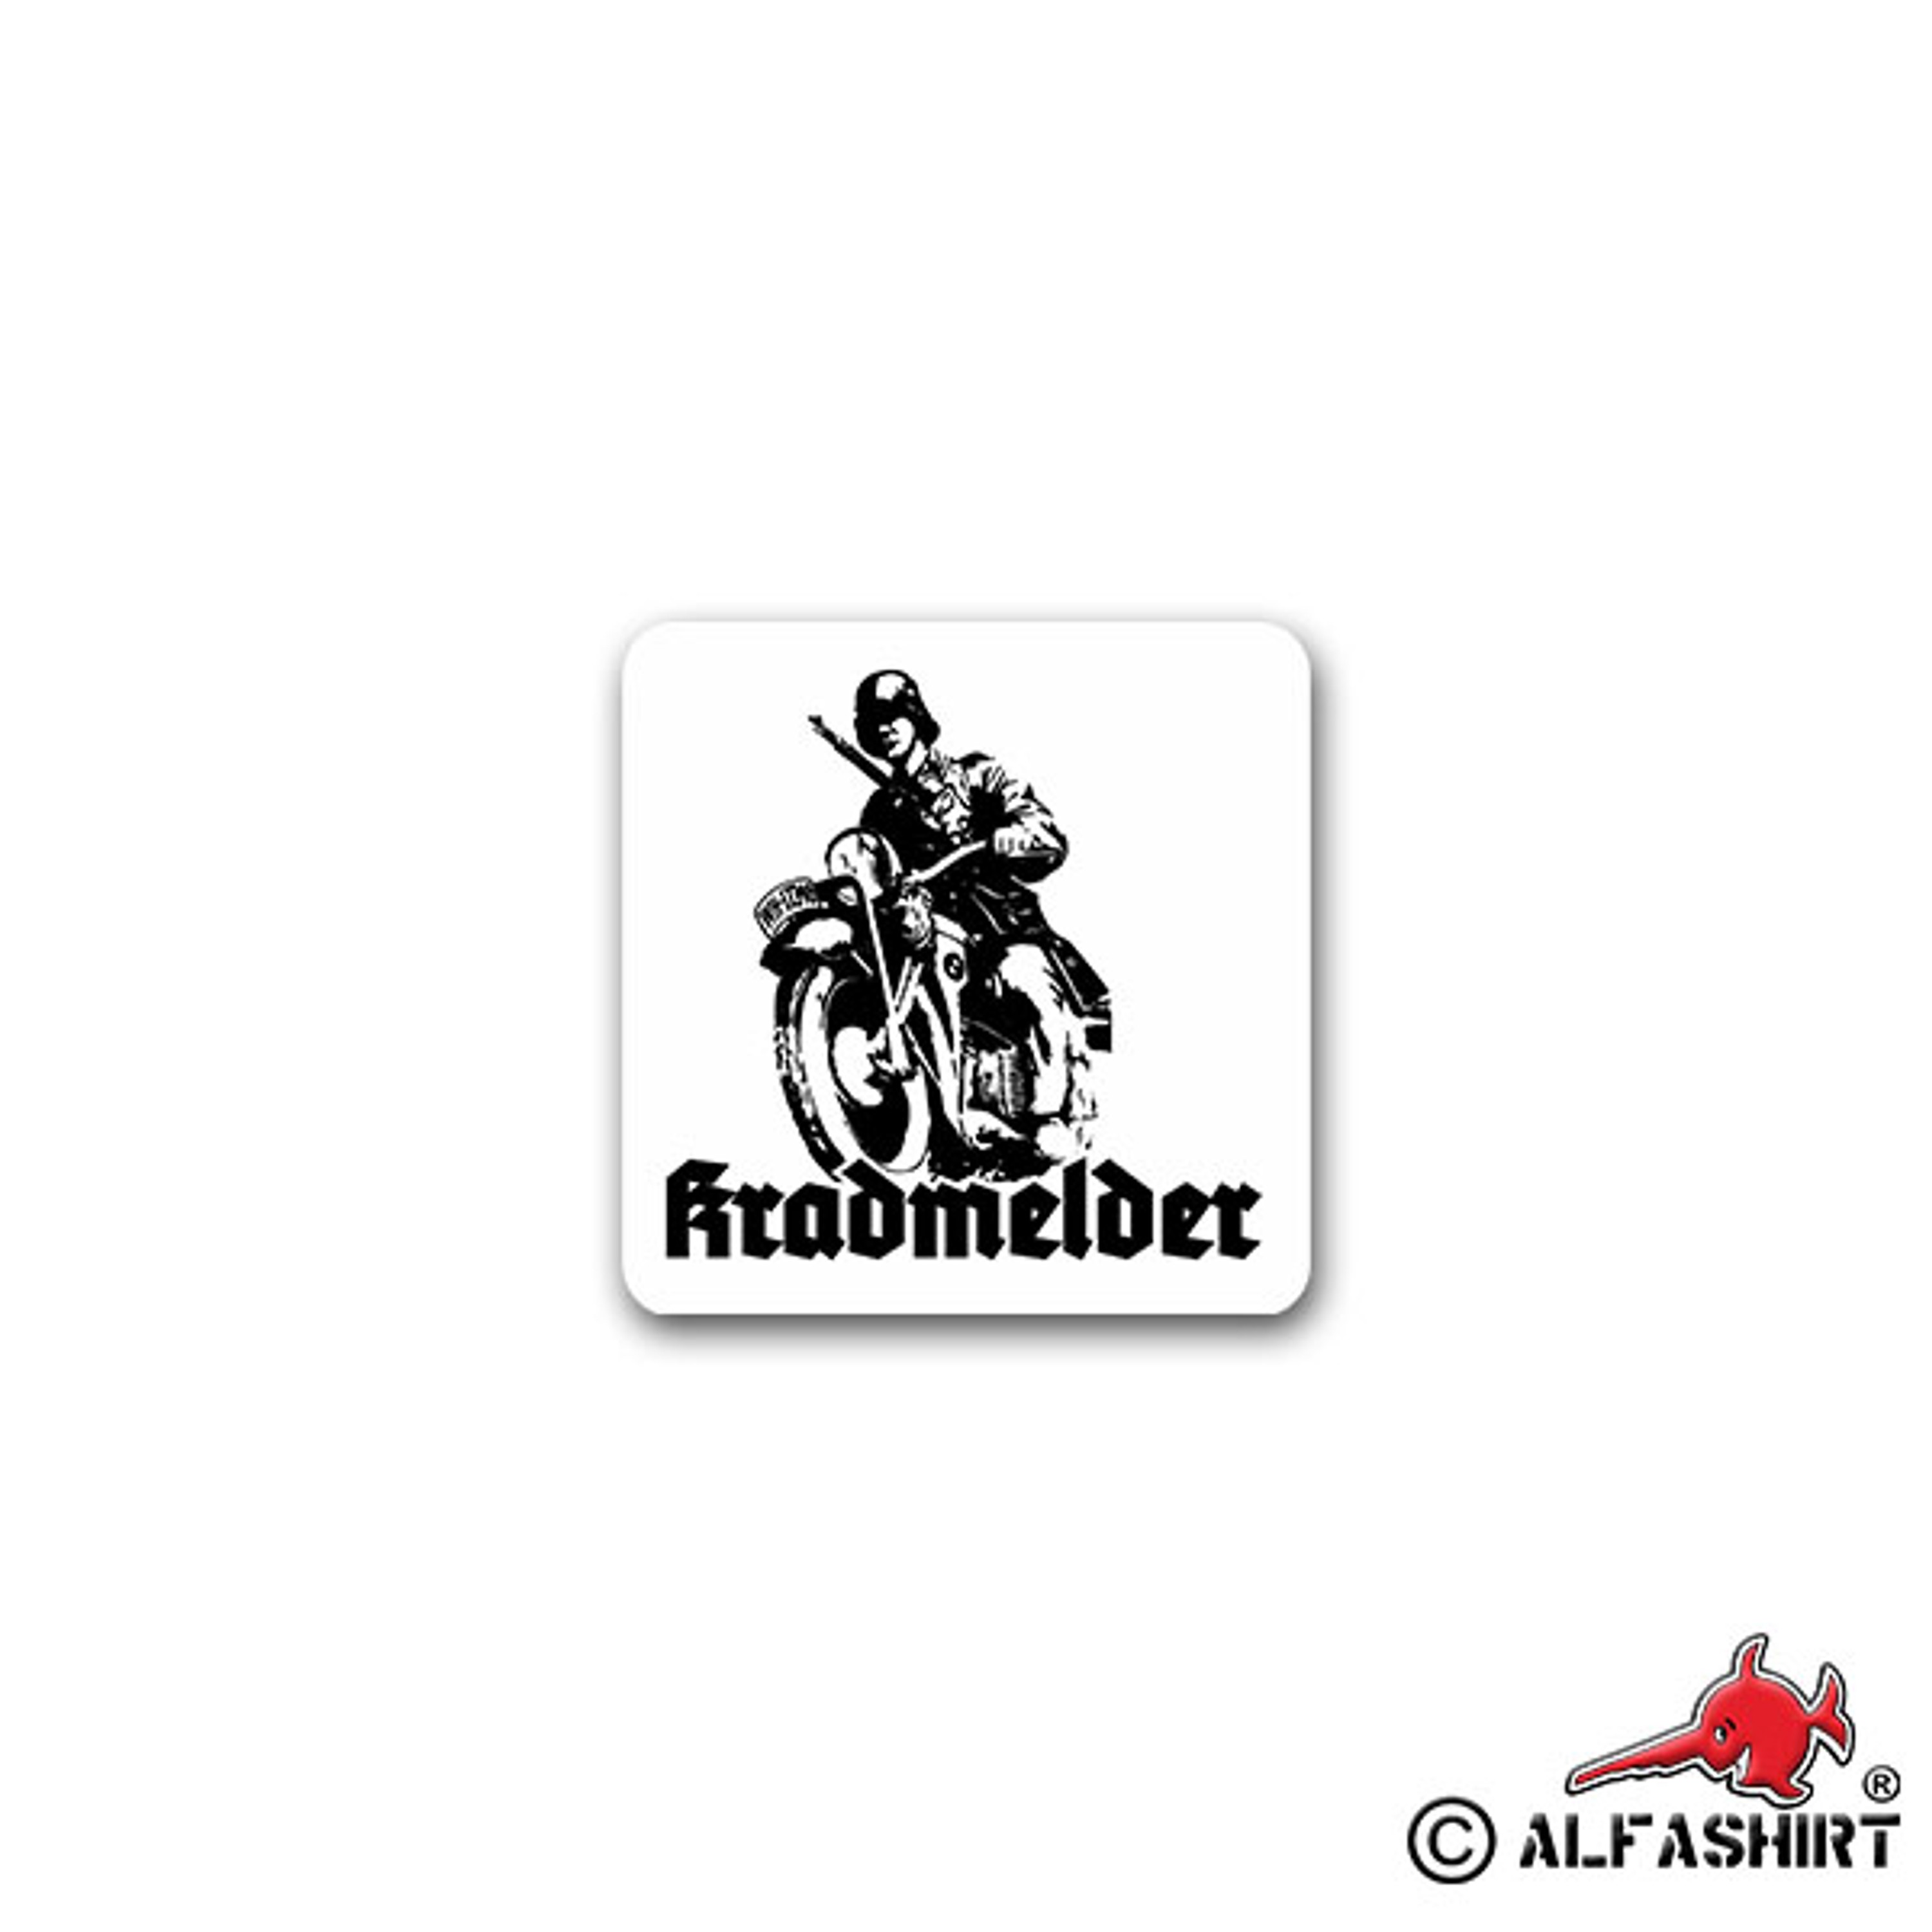 Sticker Motorcycle Motorcycle Forces Exploration Moped 7x7cm A2673